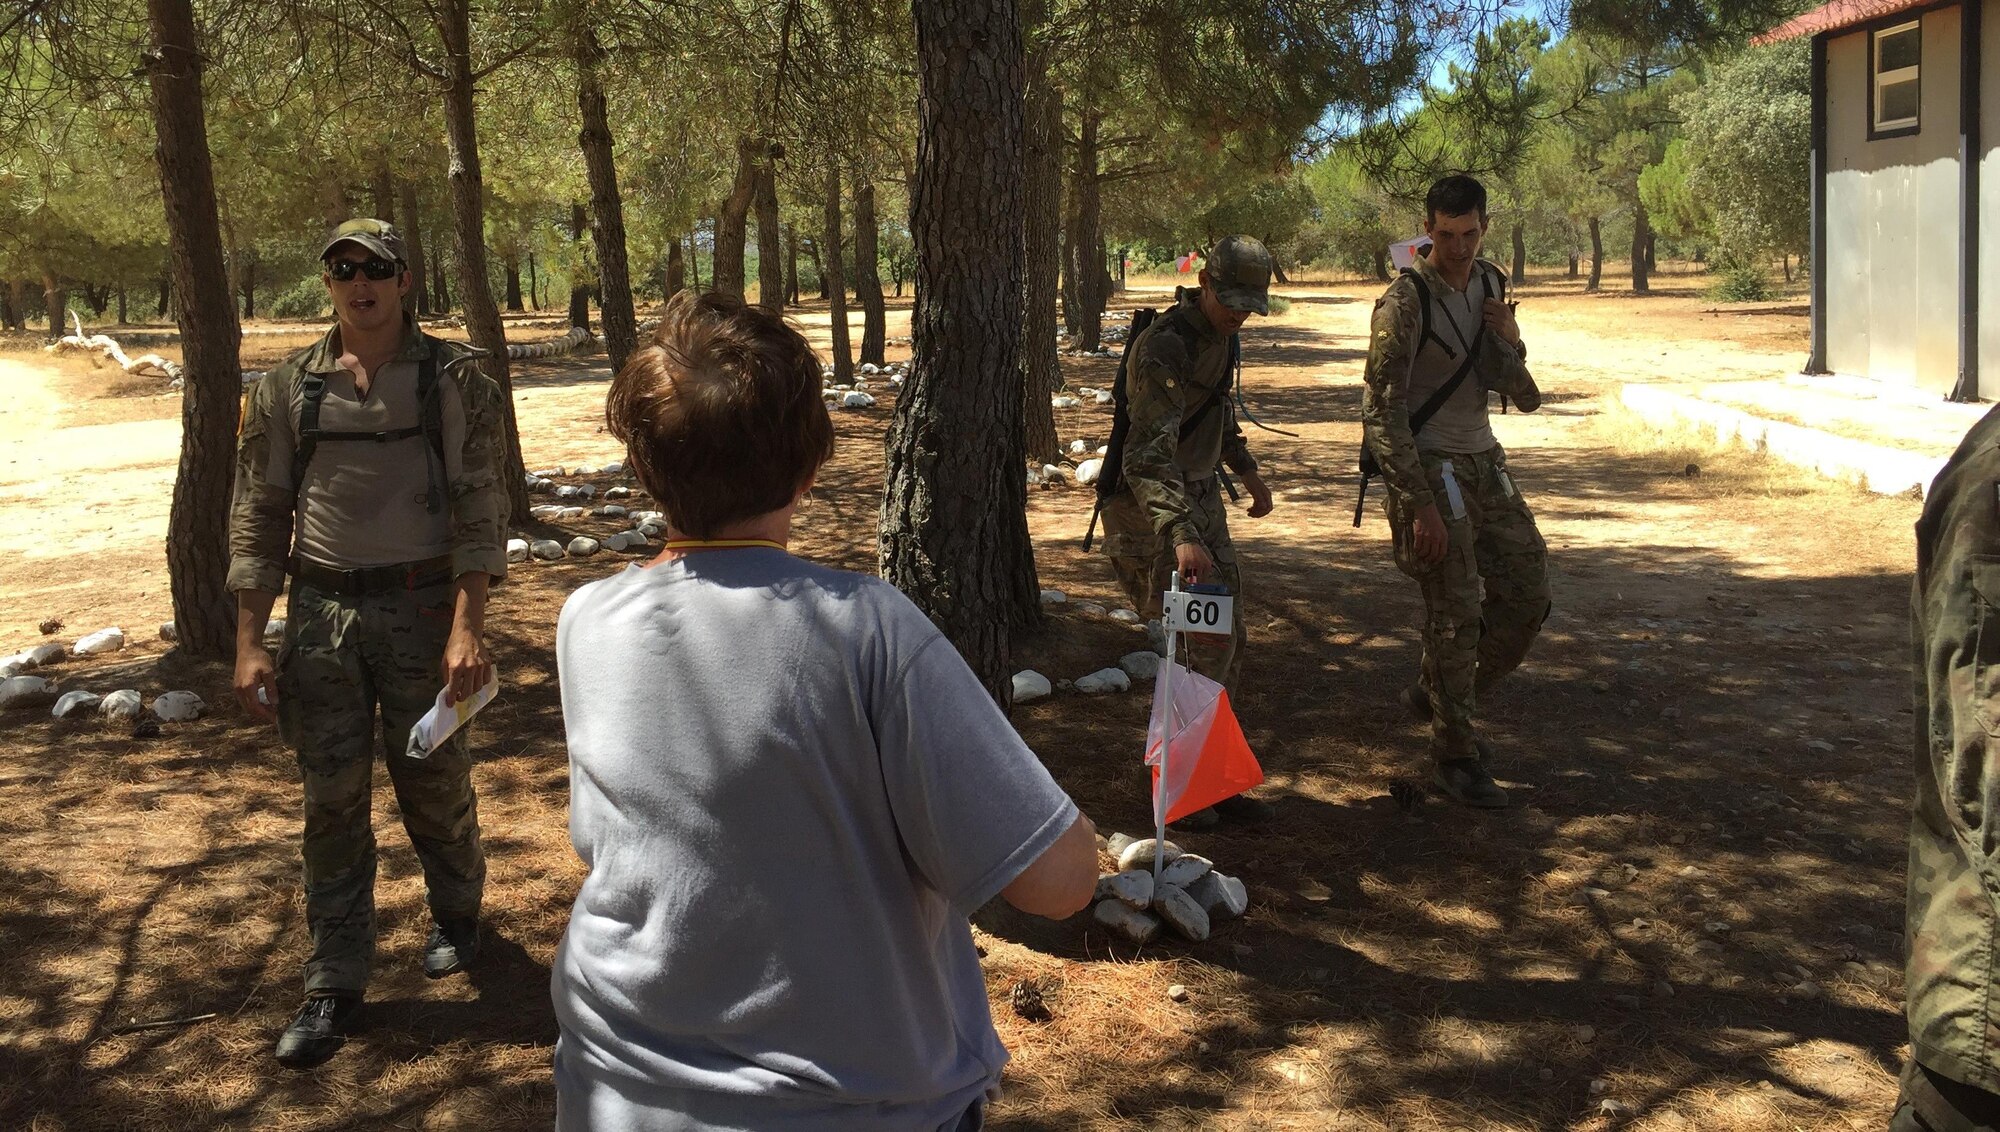 Linda Ferguson, Orienteering Coach, cheers USA Team 4 as they complete the grueling 13-kilometer Orienteering Course in 100-degree heat. (L to R): Staff Sgt. Matt Gaddy, Maj. Mike Masuda (using the electronic punch to record the team’s finish) and Maj. Pete Grossenbach.  